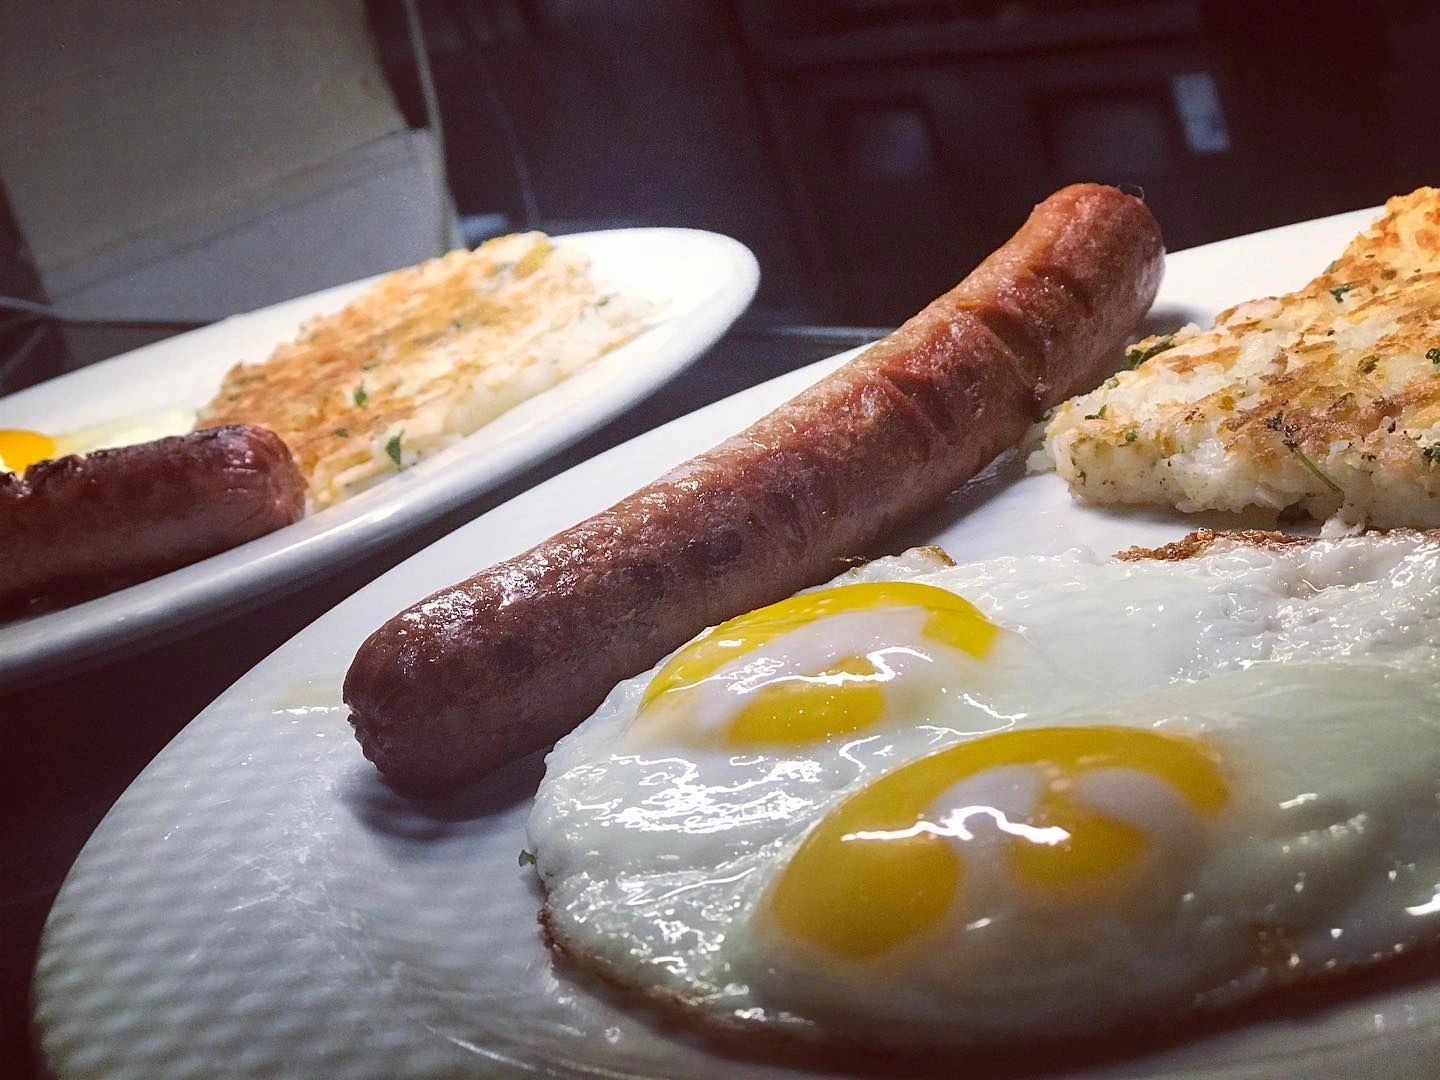 sausages and egg for your breakfast